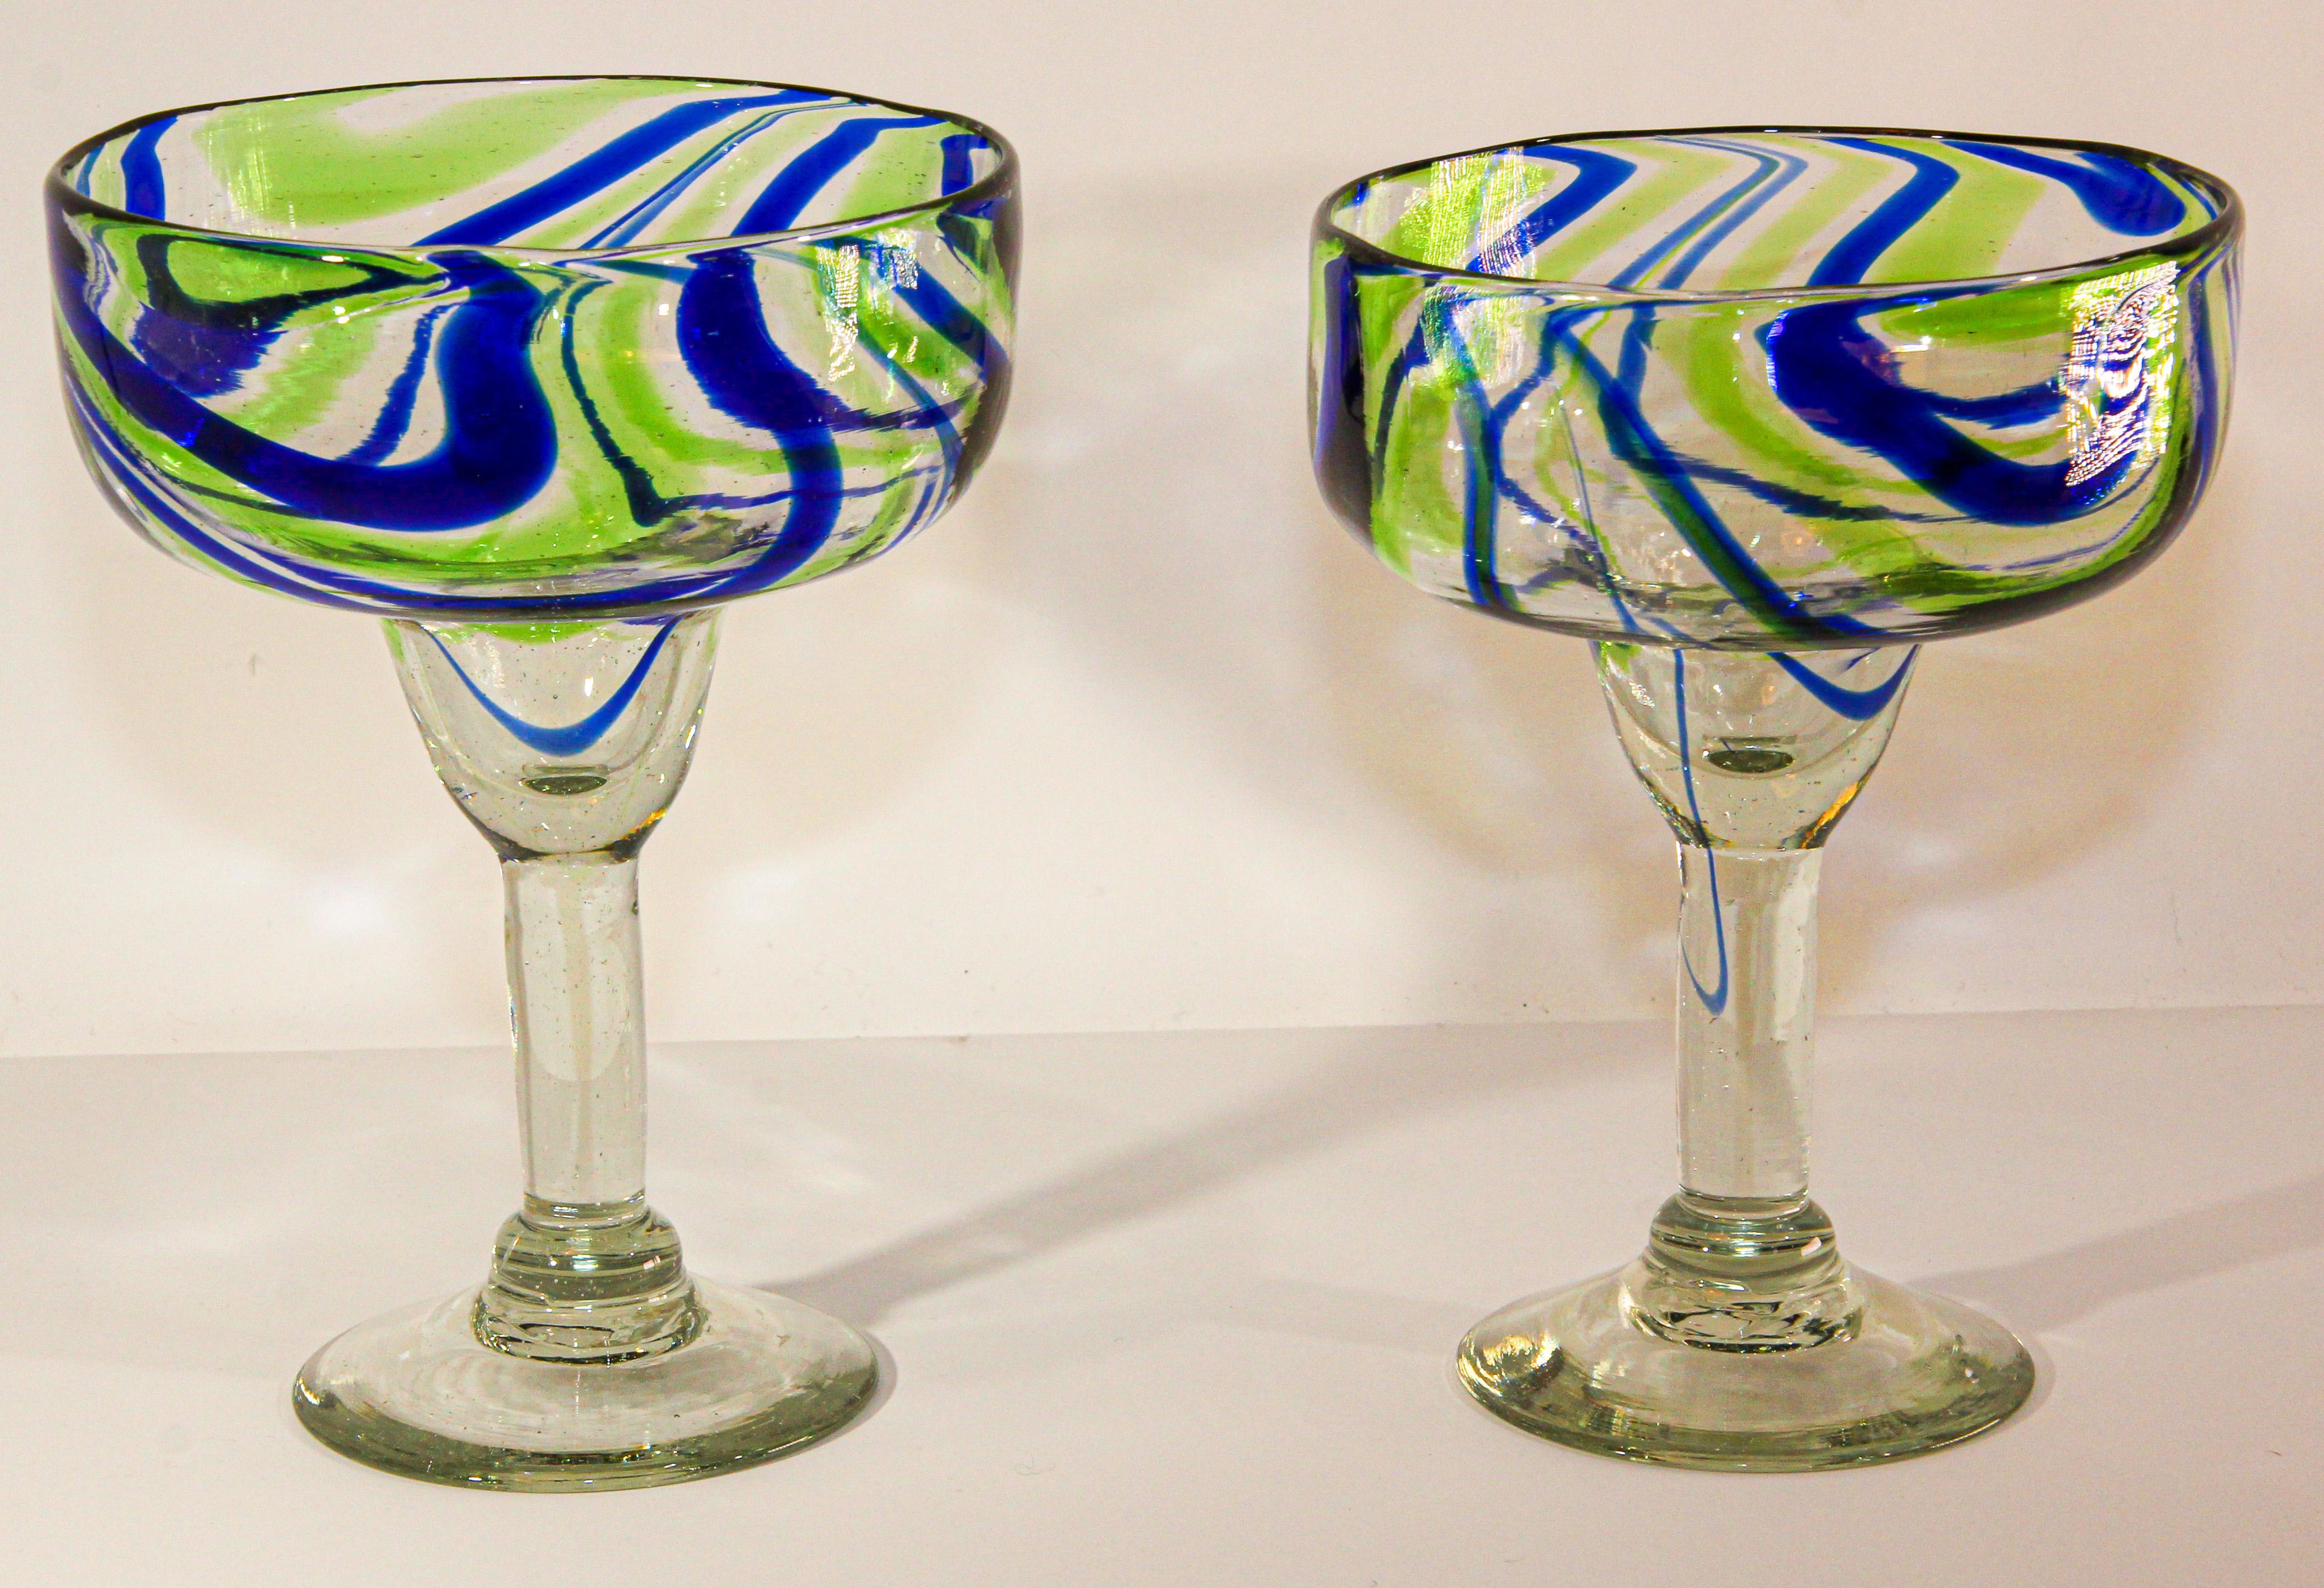 Vintage Post Modern Murano Martini Glasses Set of 2 Colorful Barware.
The glasses are hand blown with colorful abstract design in blue and green waves, each one is unique in design and size.
Measures: 5